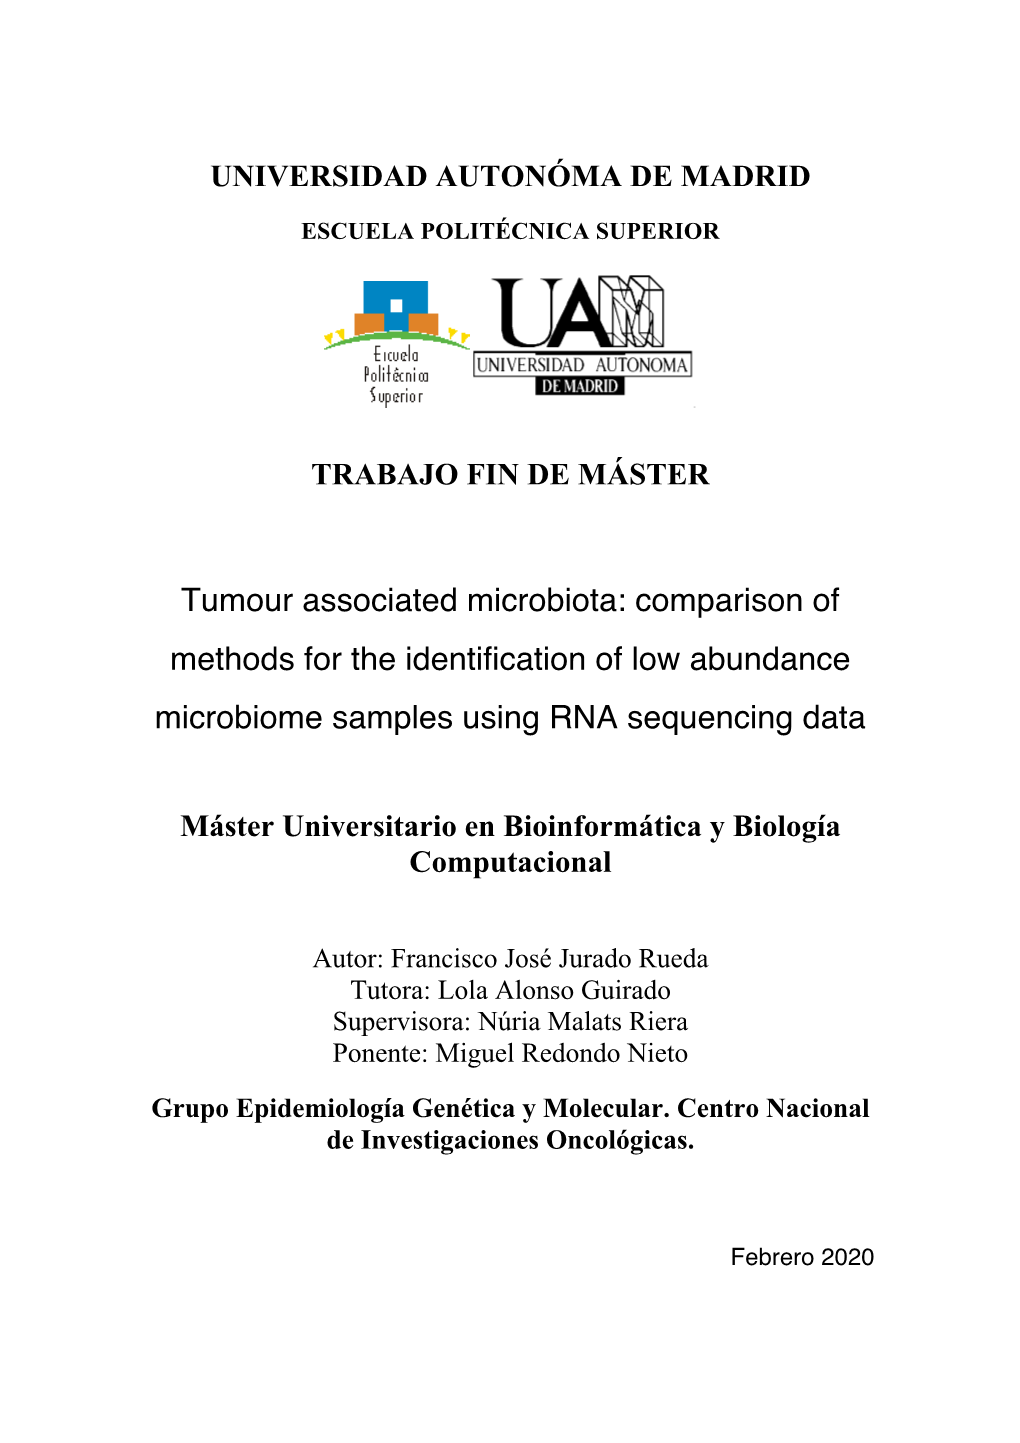 Tumour Associated Microbiota: Comparison of Methods for the Identification of Low Abundance Microbiome Samples Using RNA Sequencing Data